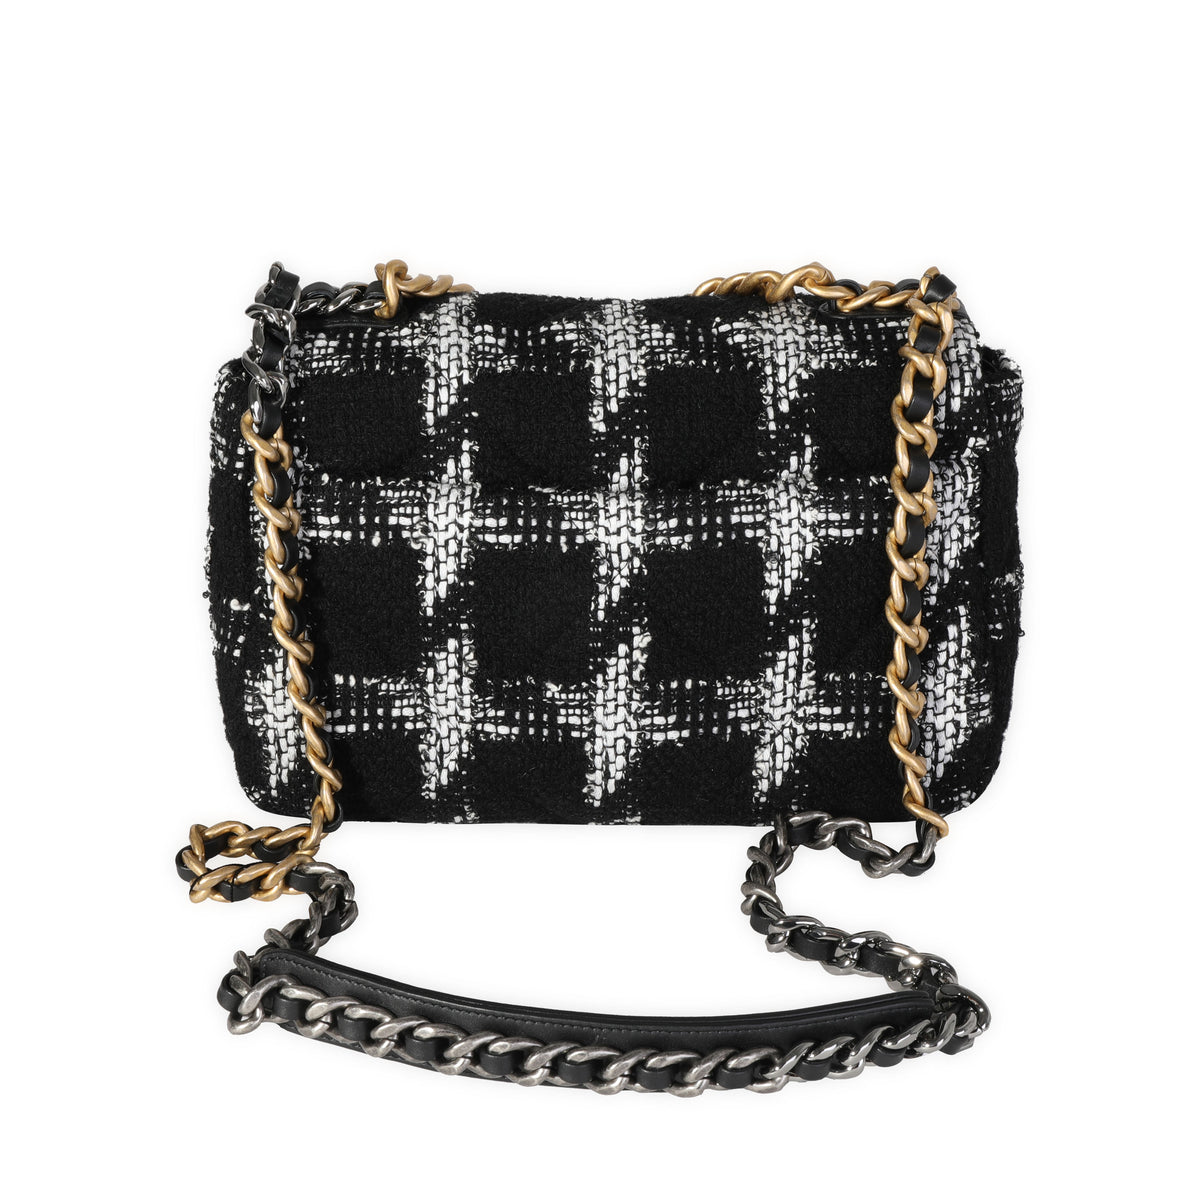 Chanel Black & White Tweed Quilted Medium Chanel 19 Flap